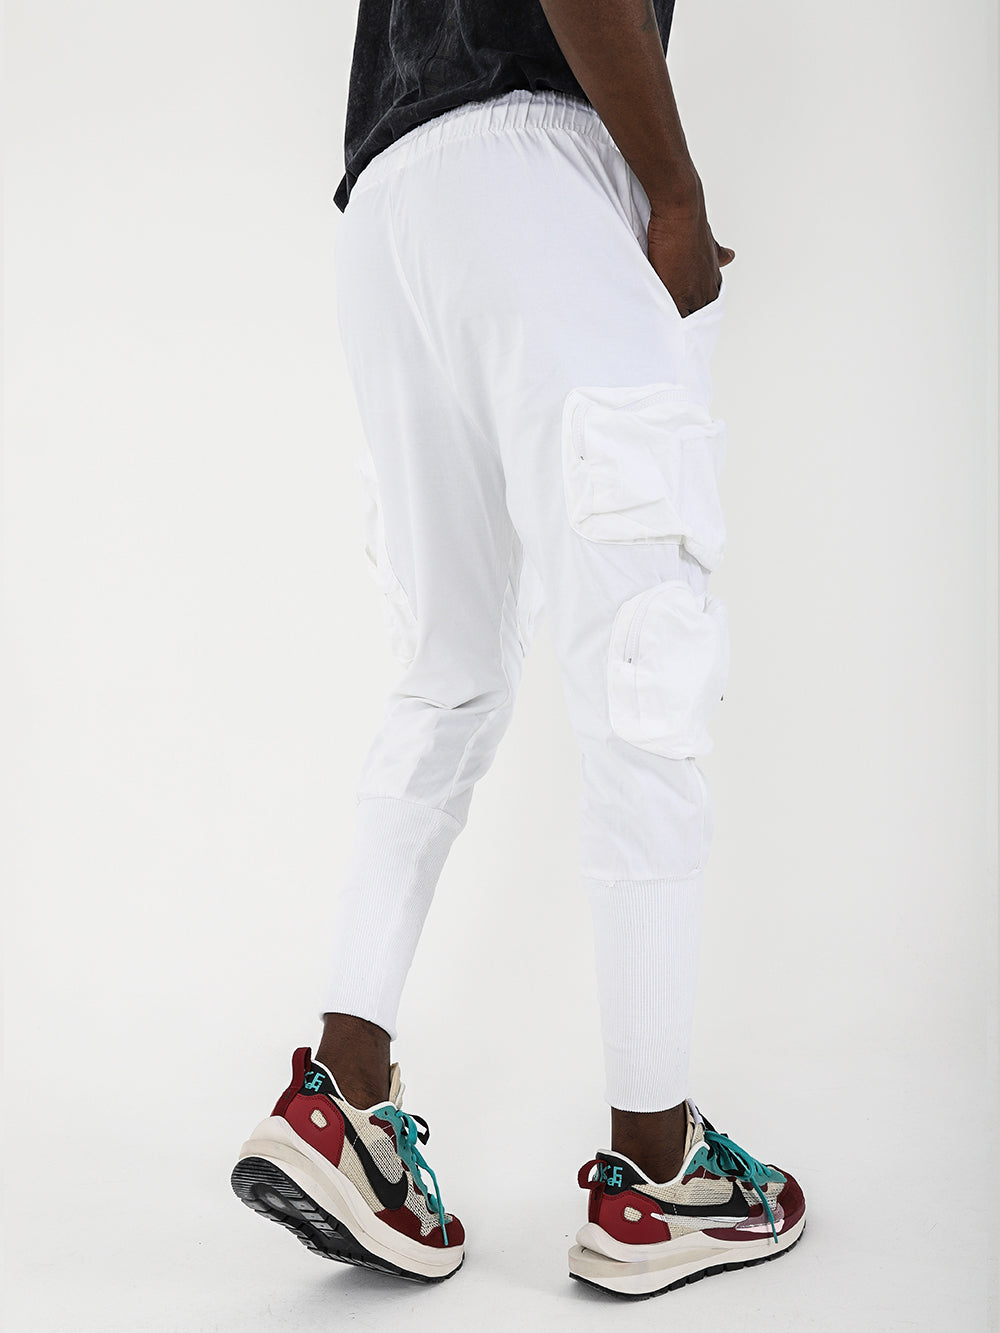 A man wearing STERLING joggers and sneakers.